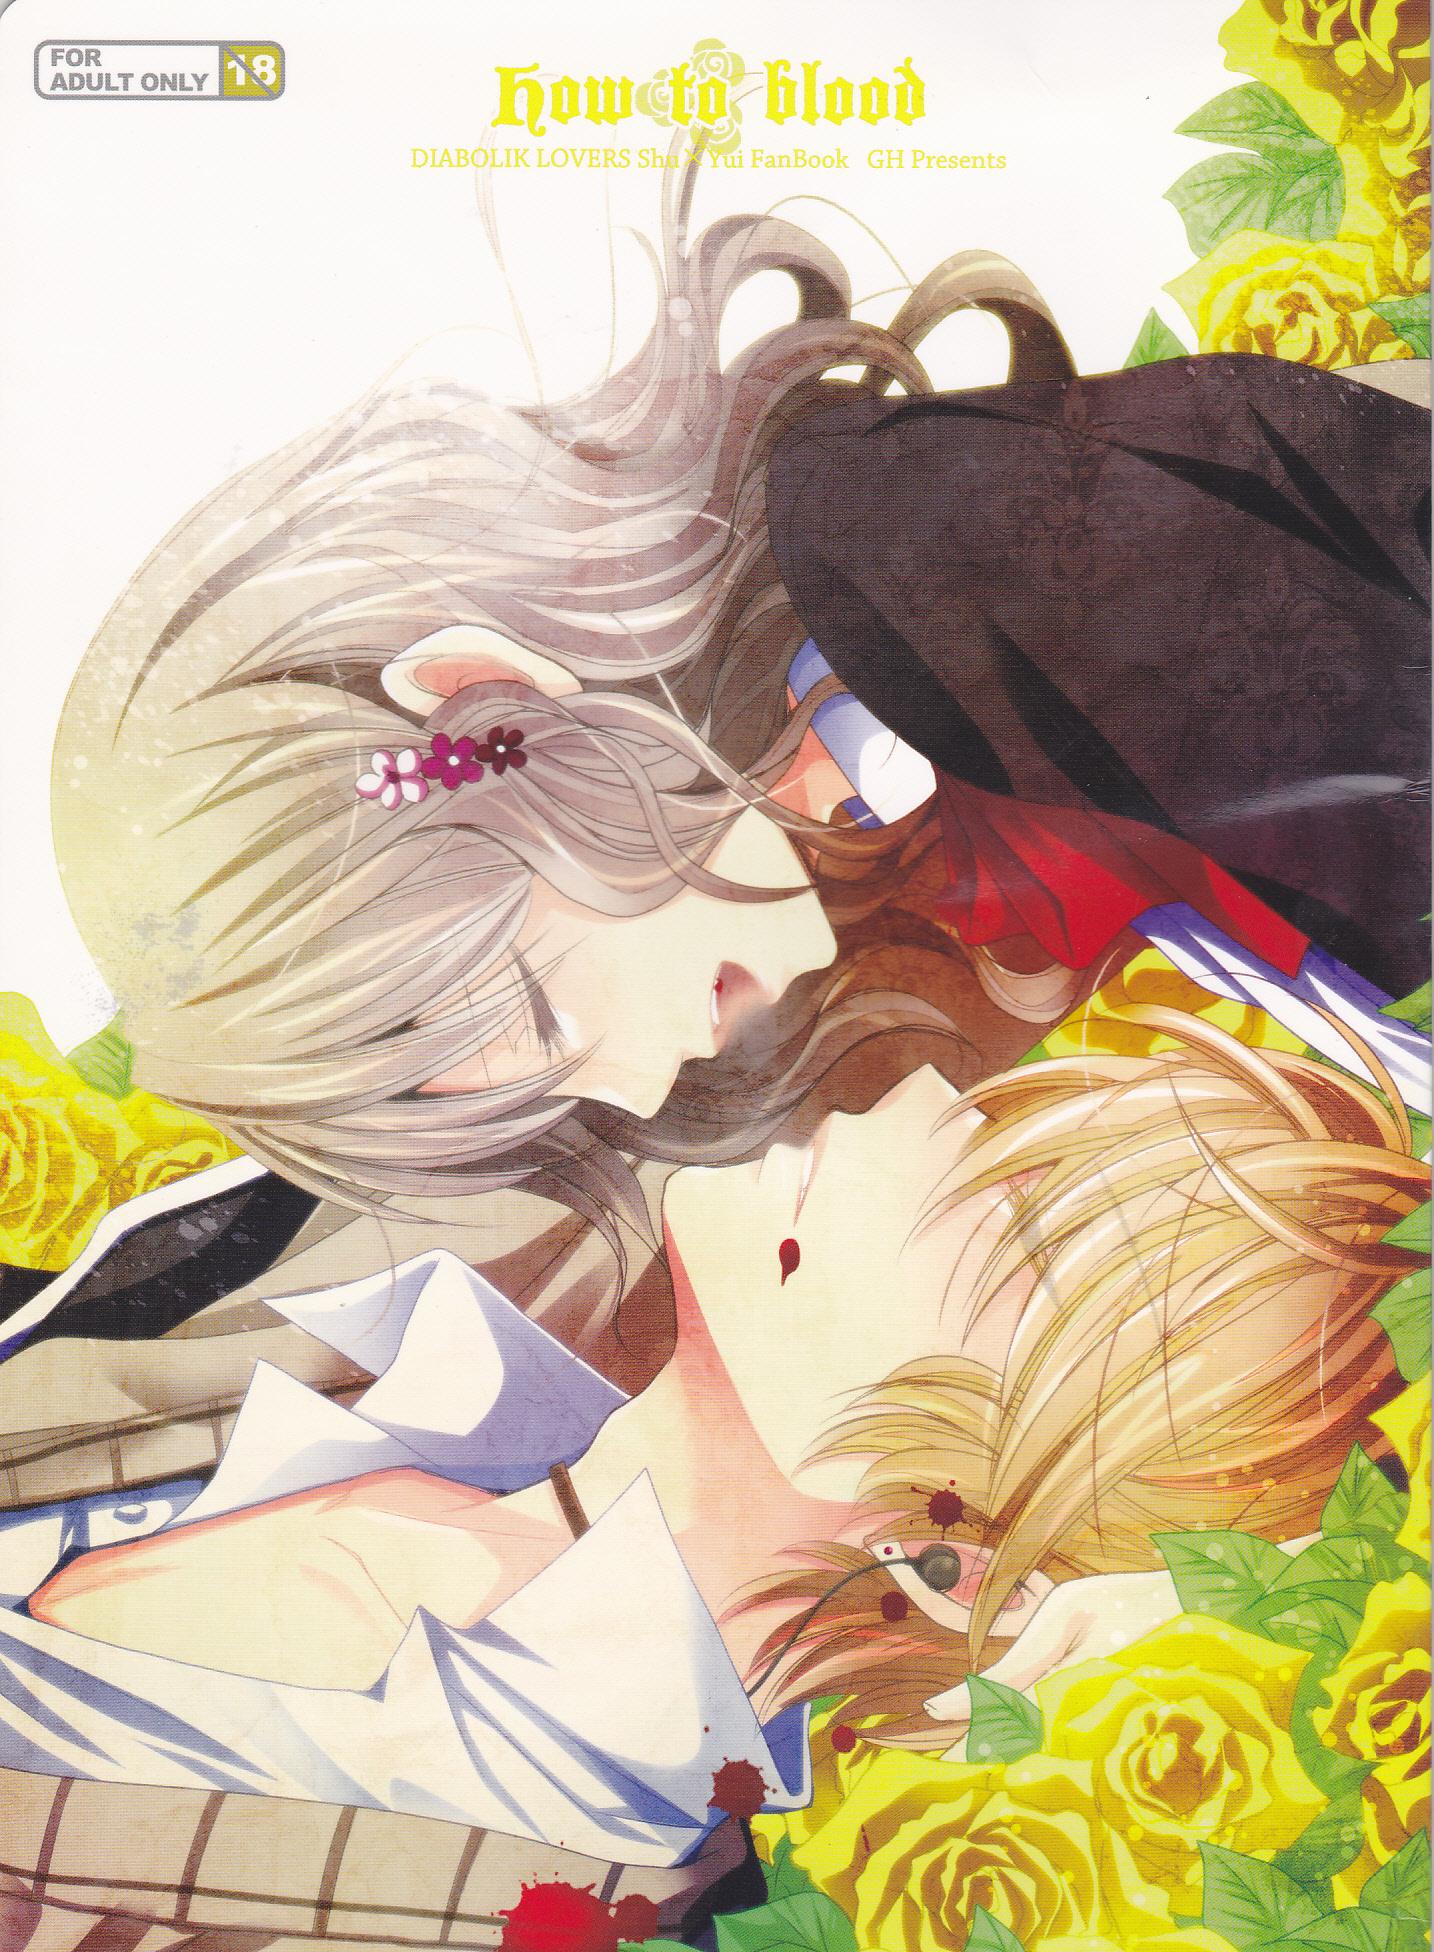 Asslicking How to Blood - Diabolik lovers No Condom - Page 1